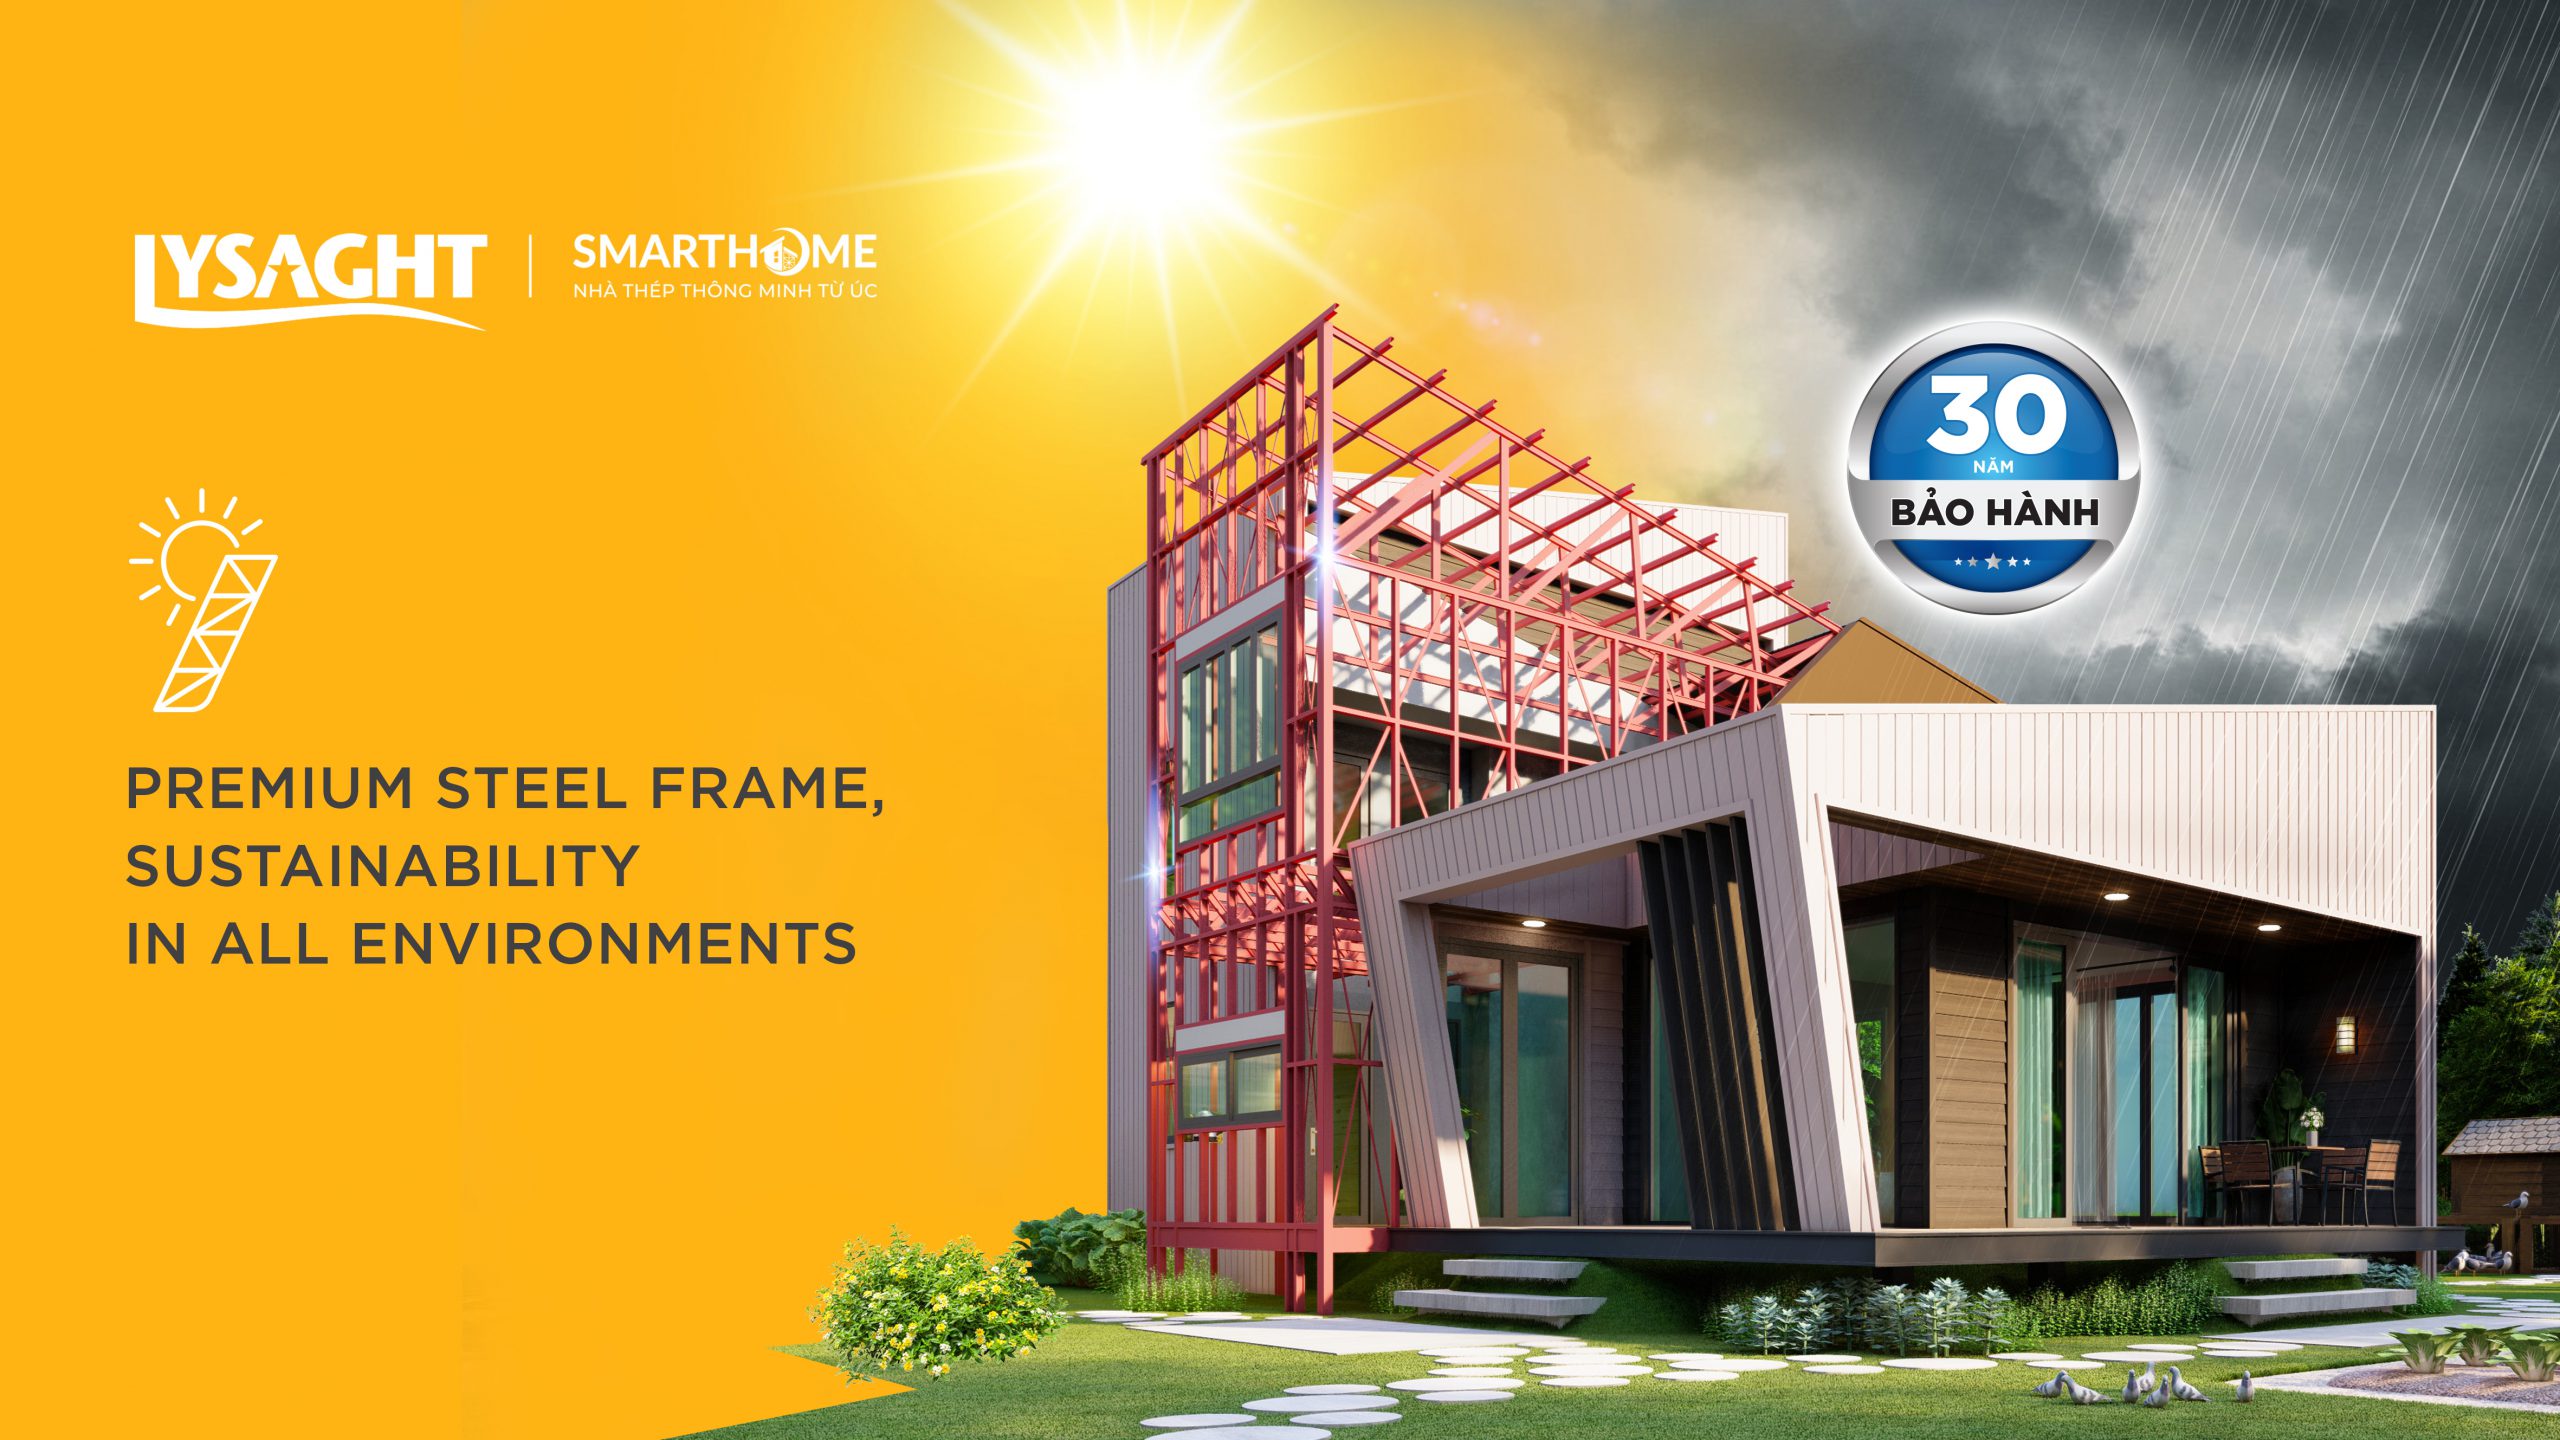 PREMIUM STEEL FRAME, SUSTAINABILITY IN ALL ENVIRONMENTS